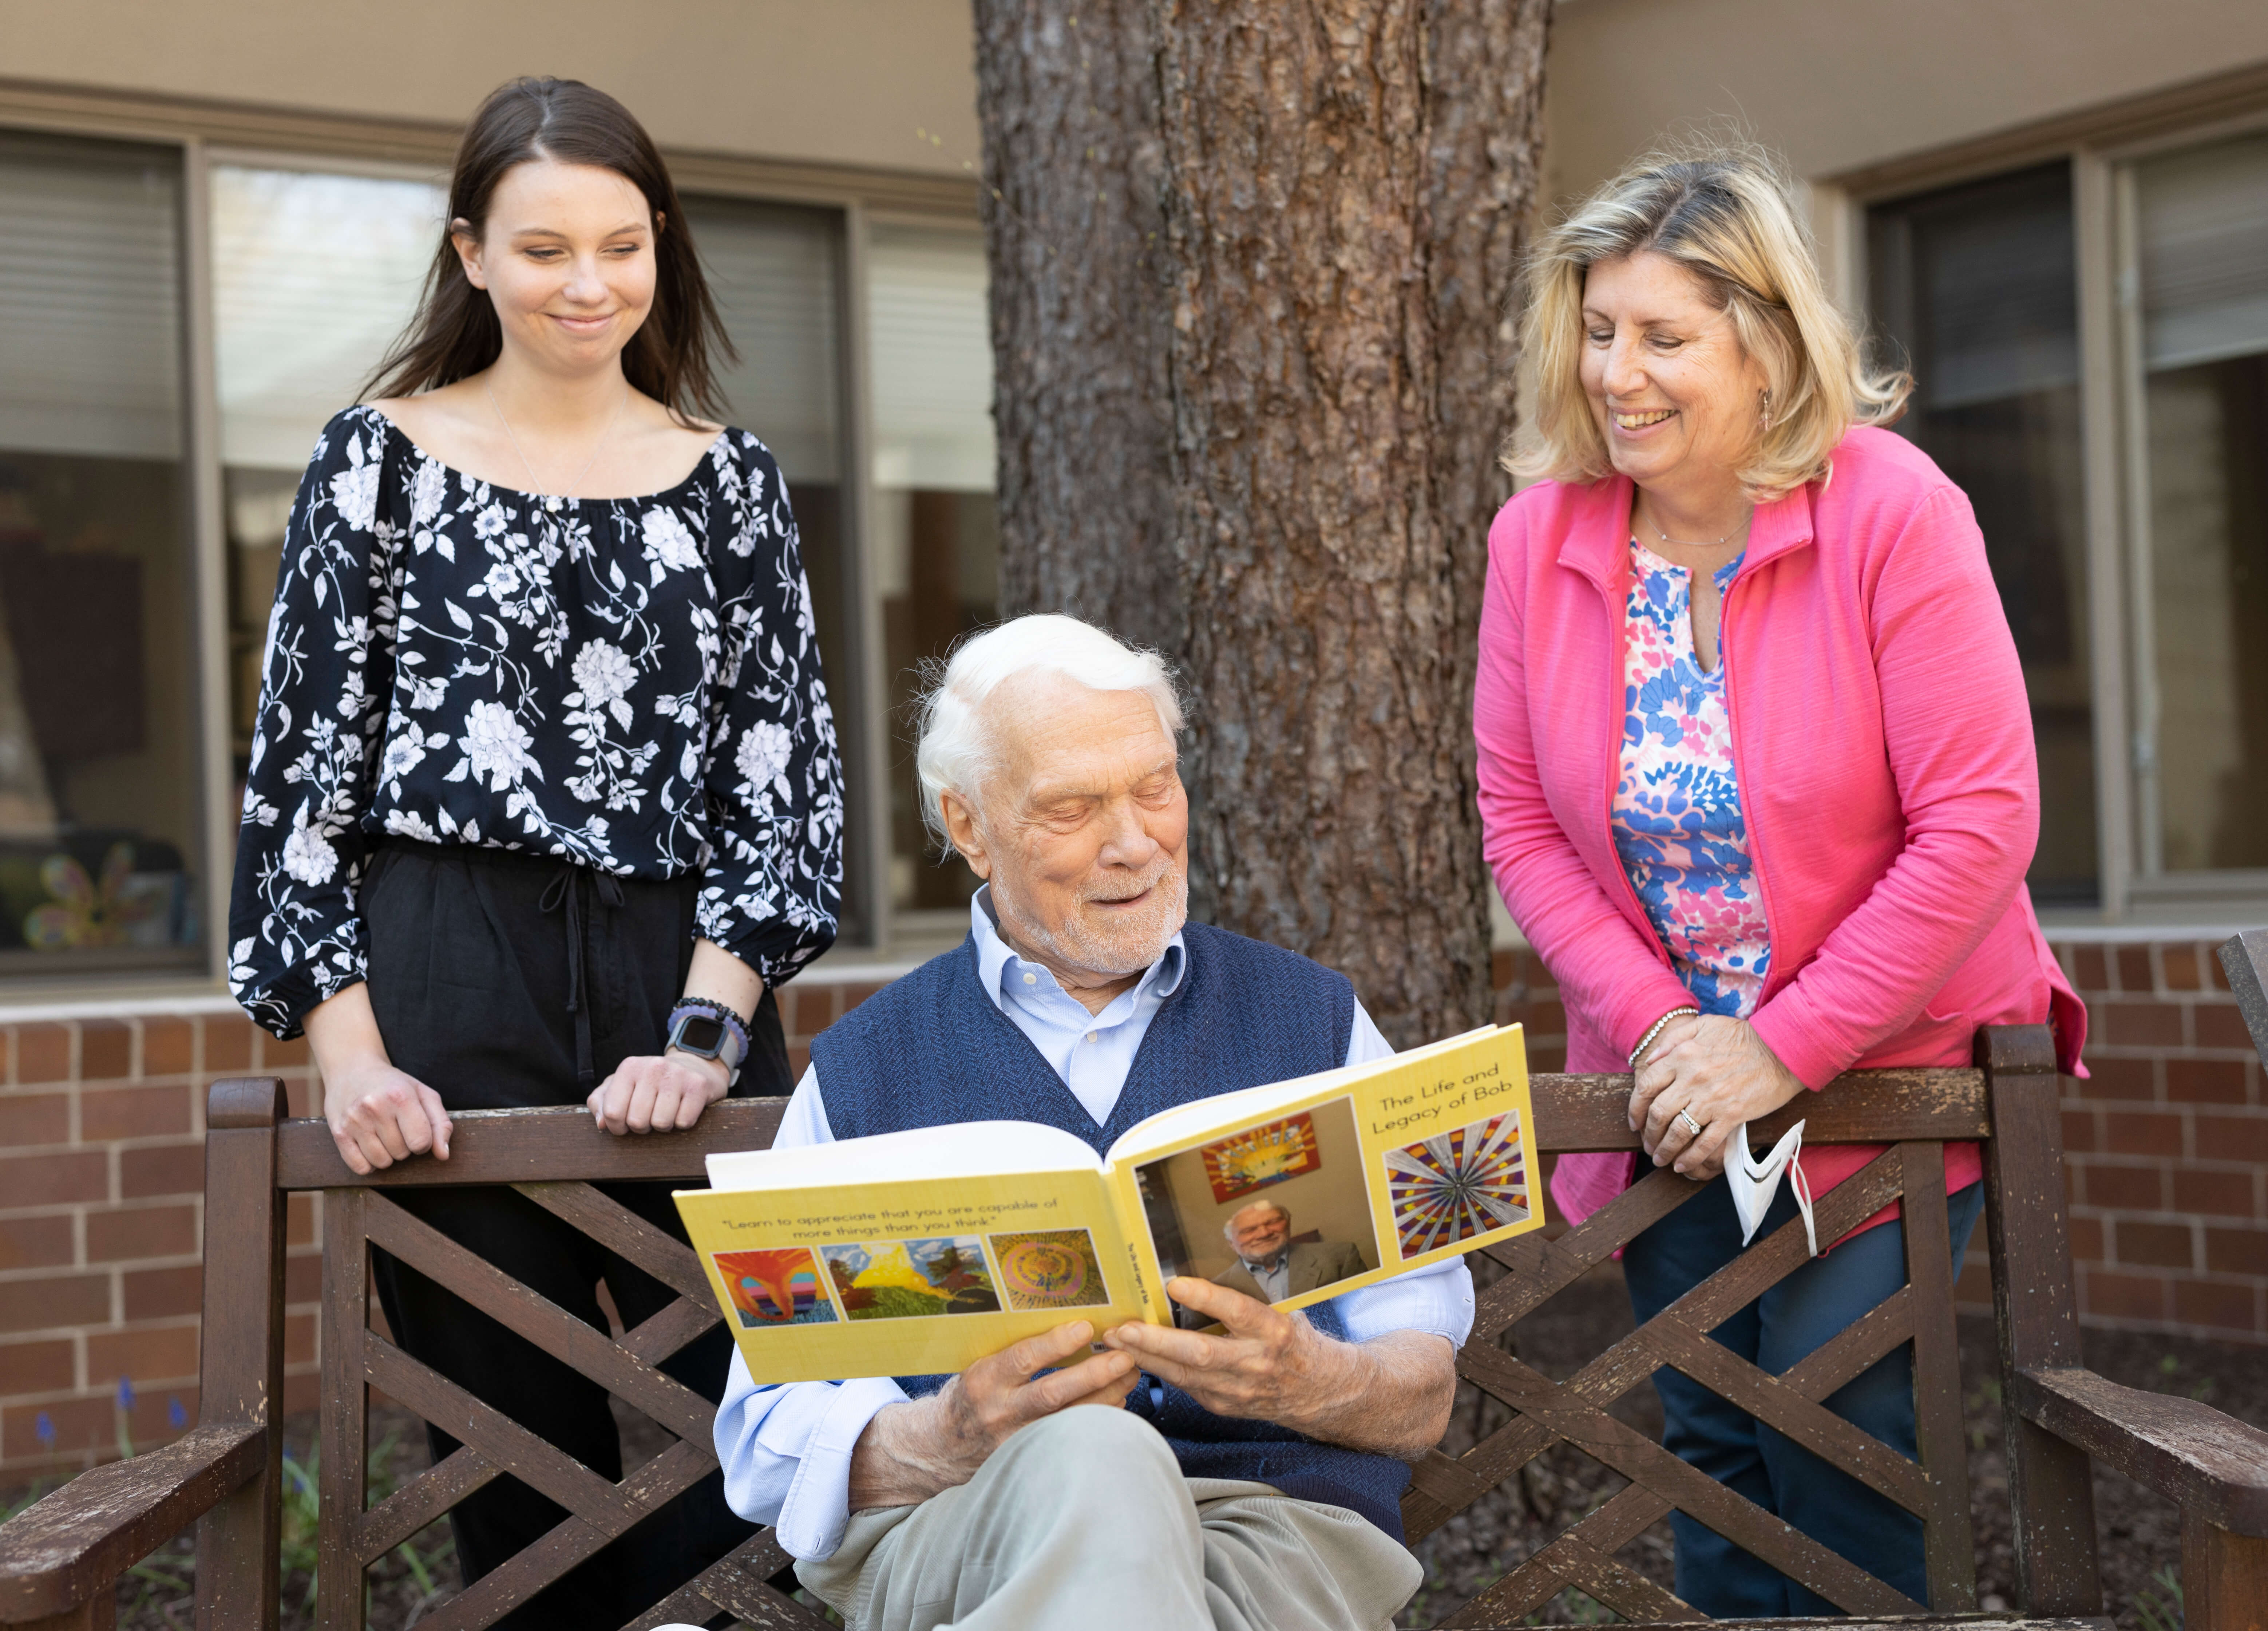 Bob Savage, a resident of LiveWell Dementia Specialists facility, reads from his Legacy book to volunteers Jessica Leach and Janet Waldman